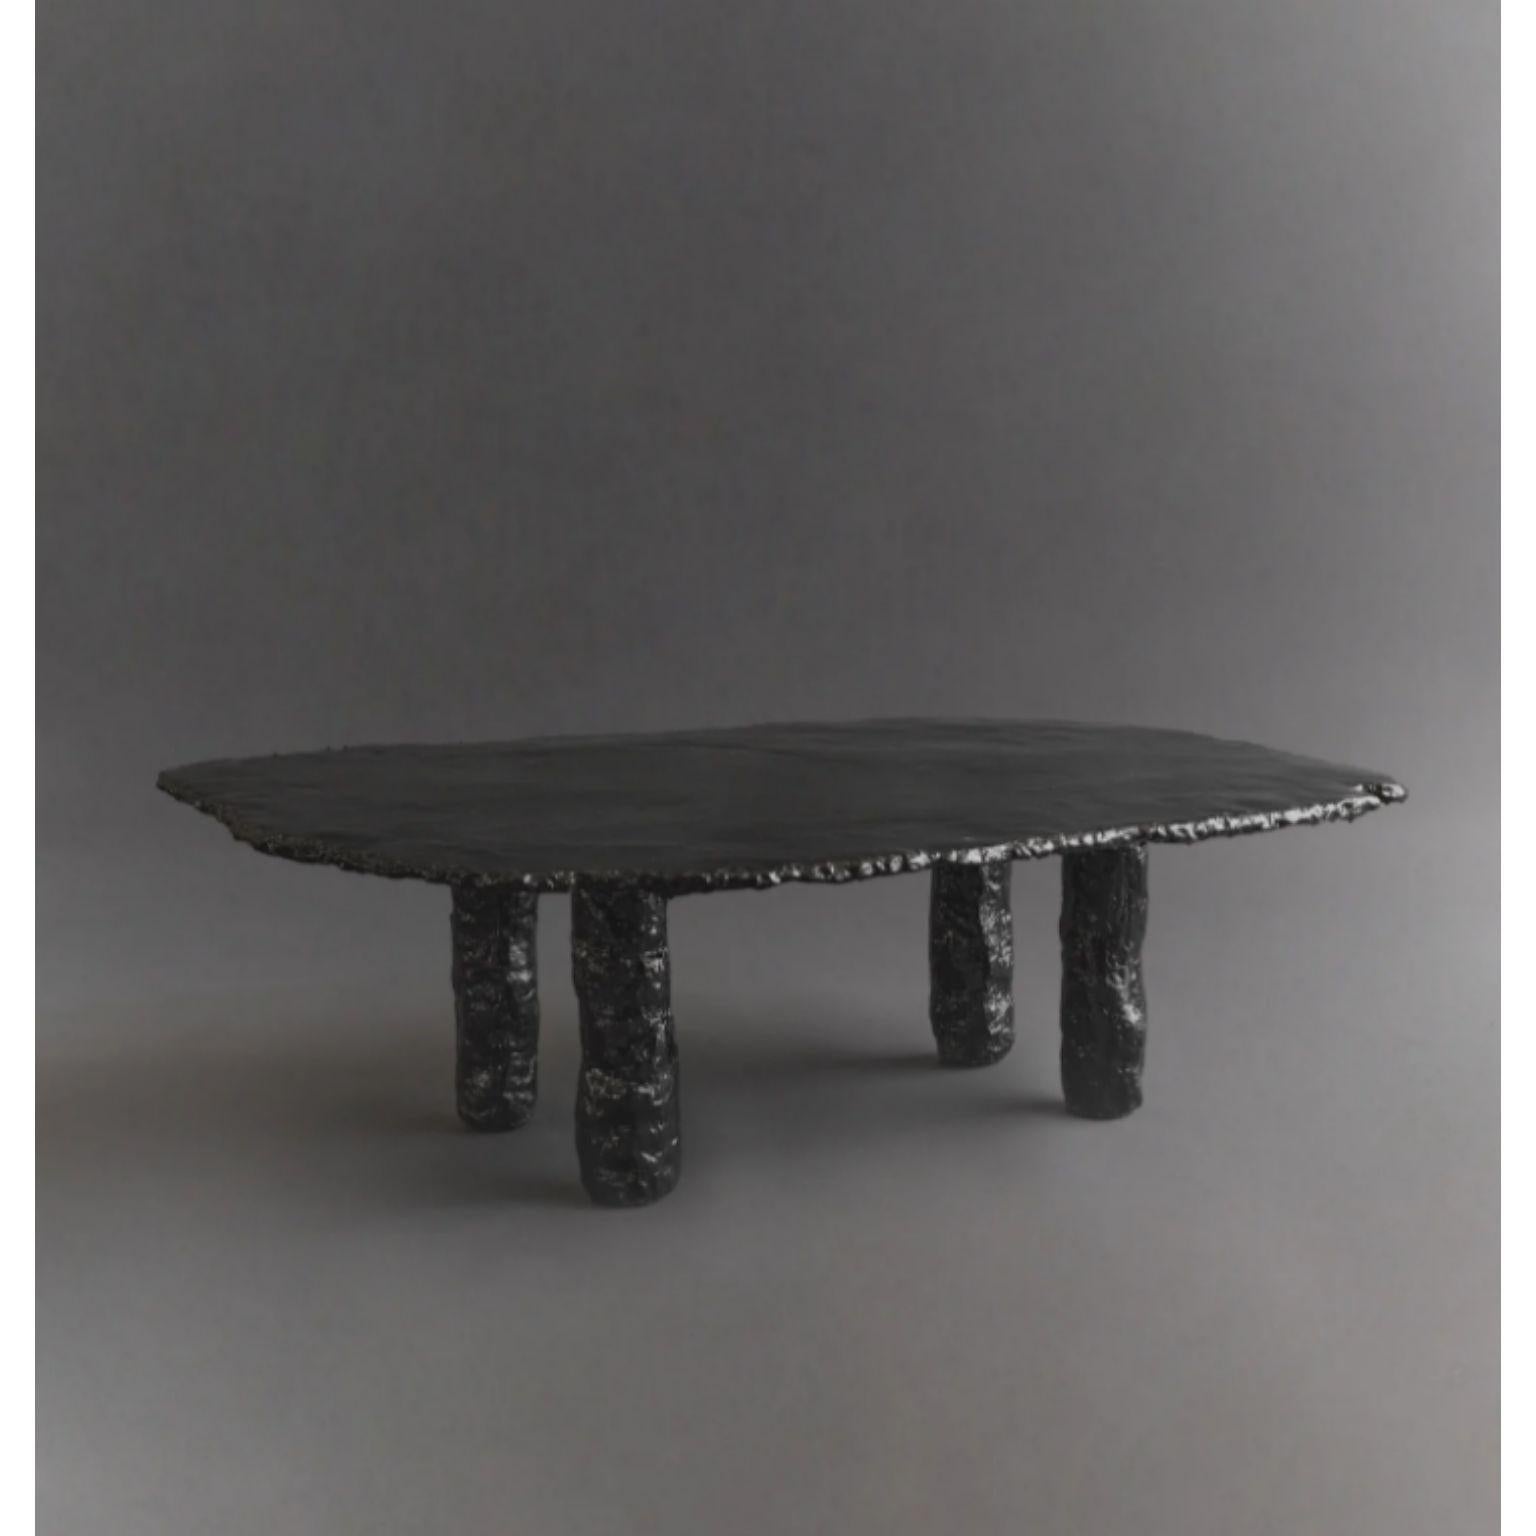 Slab coffee table 01 by Ombia
Dimensions: W 127 x D 82 x H 38 cm
Materials: Mix media, black resin finish.
Custom sizes and finishes upon request.


Ombia is a ceramic sculpture and design studio based in Los Angeles. The name and its roots